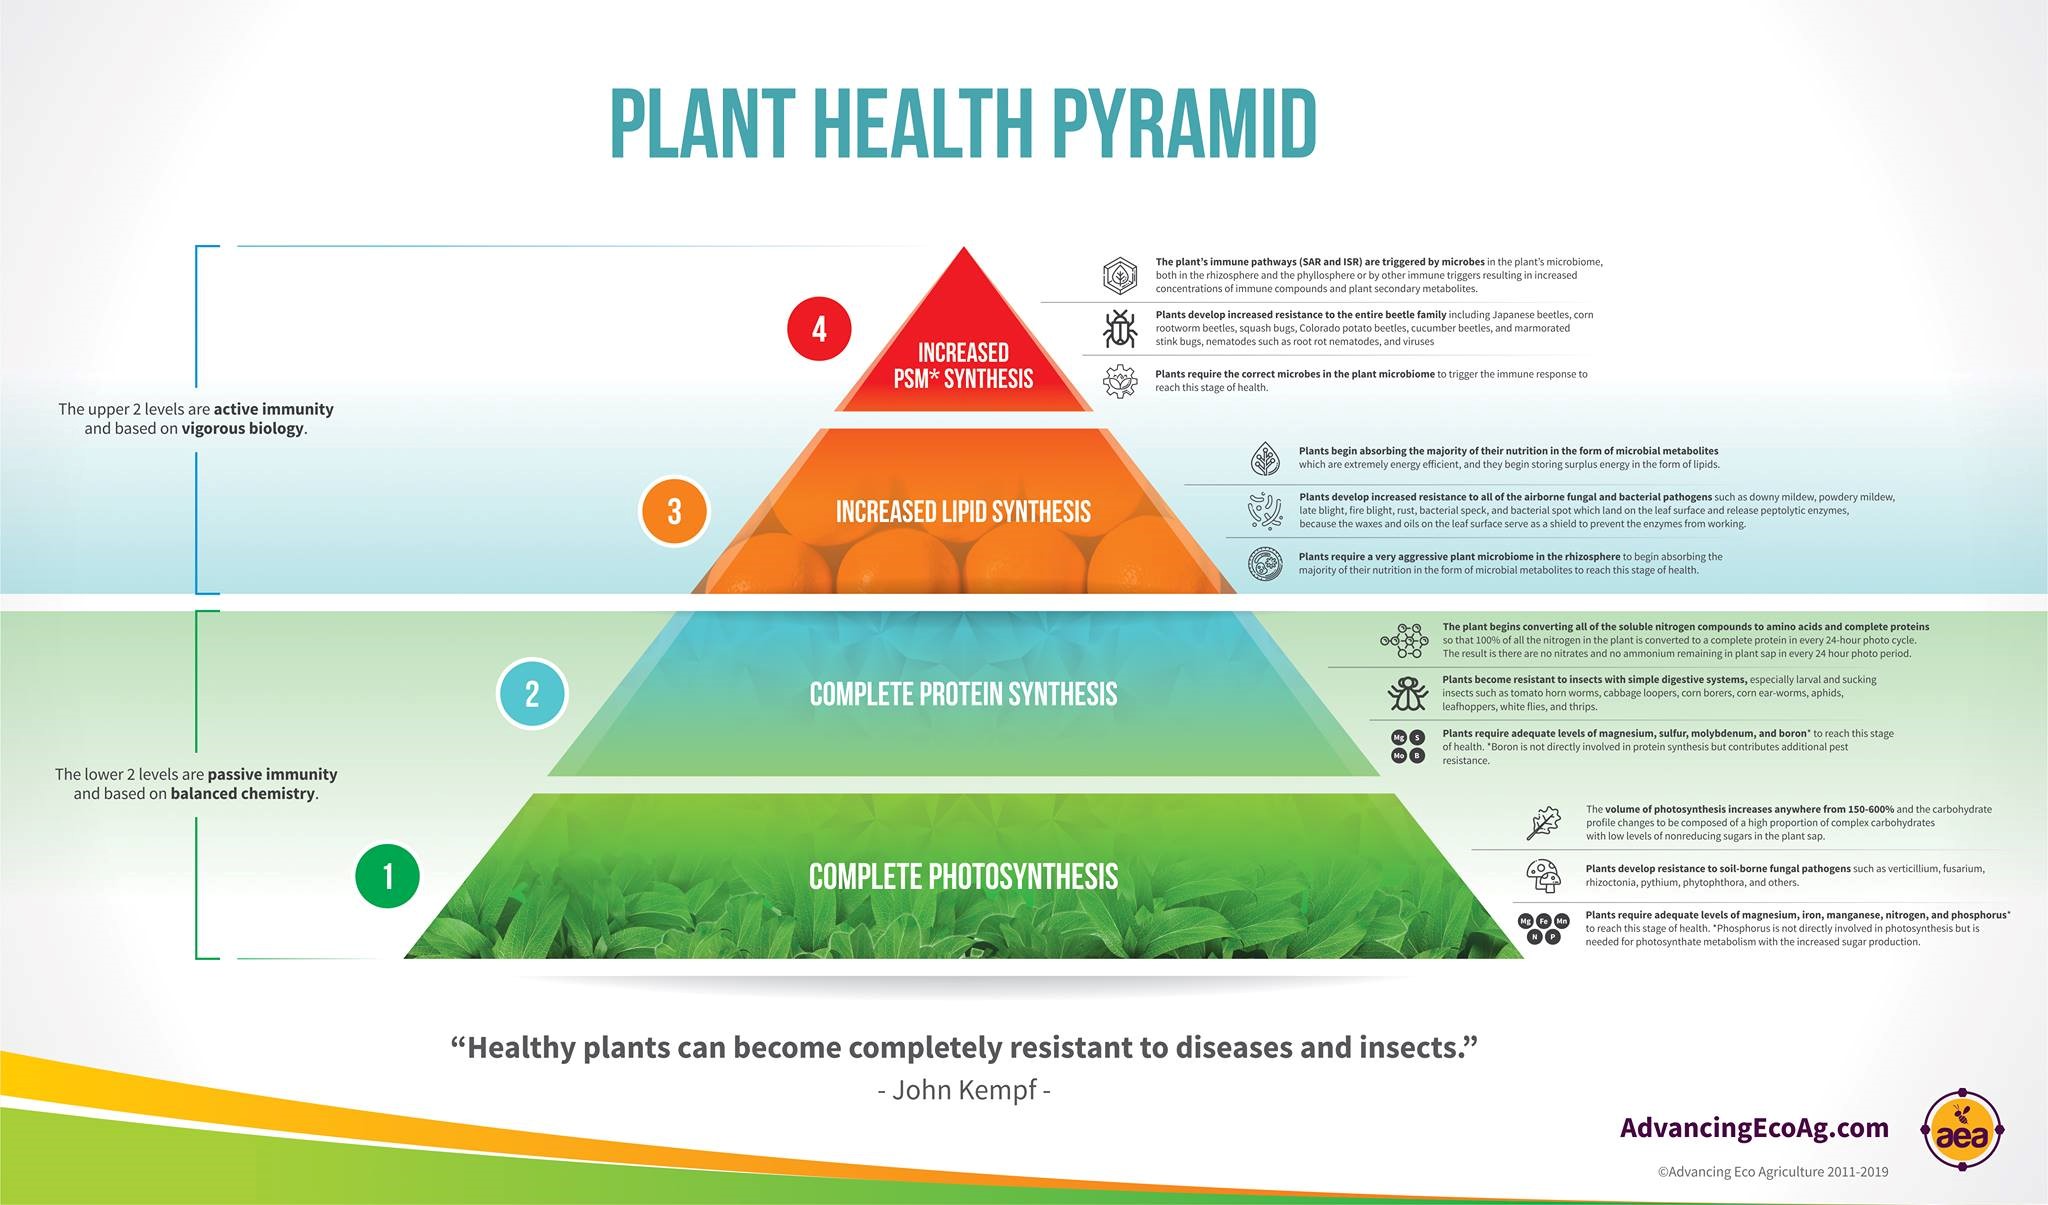 Plant Health Pyramid - click to go to website with complete PDF